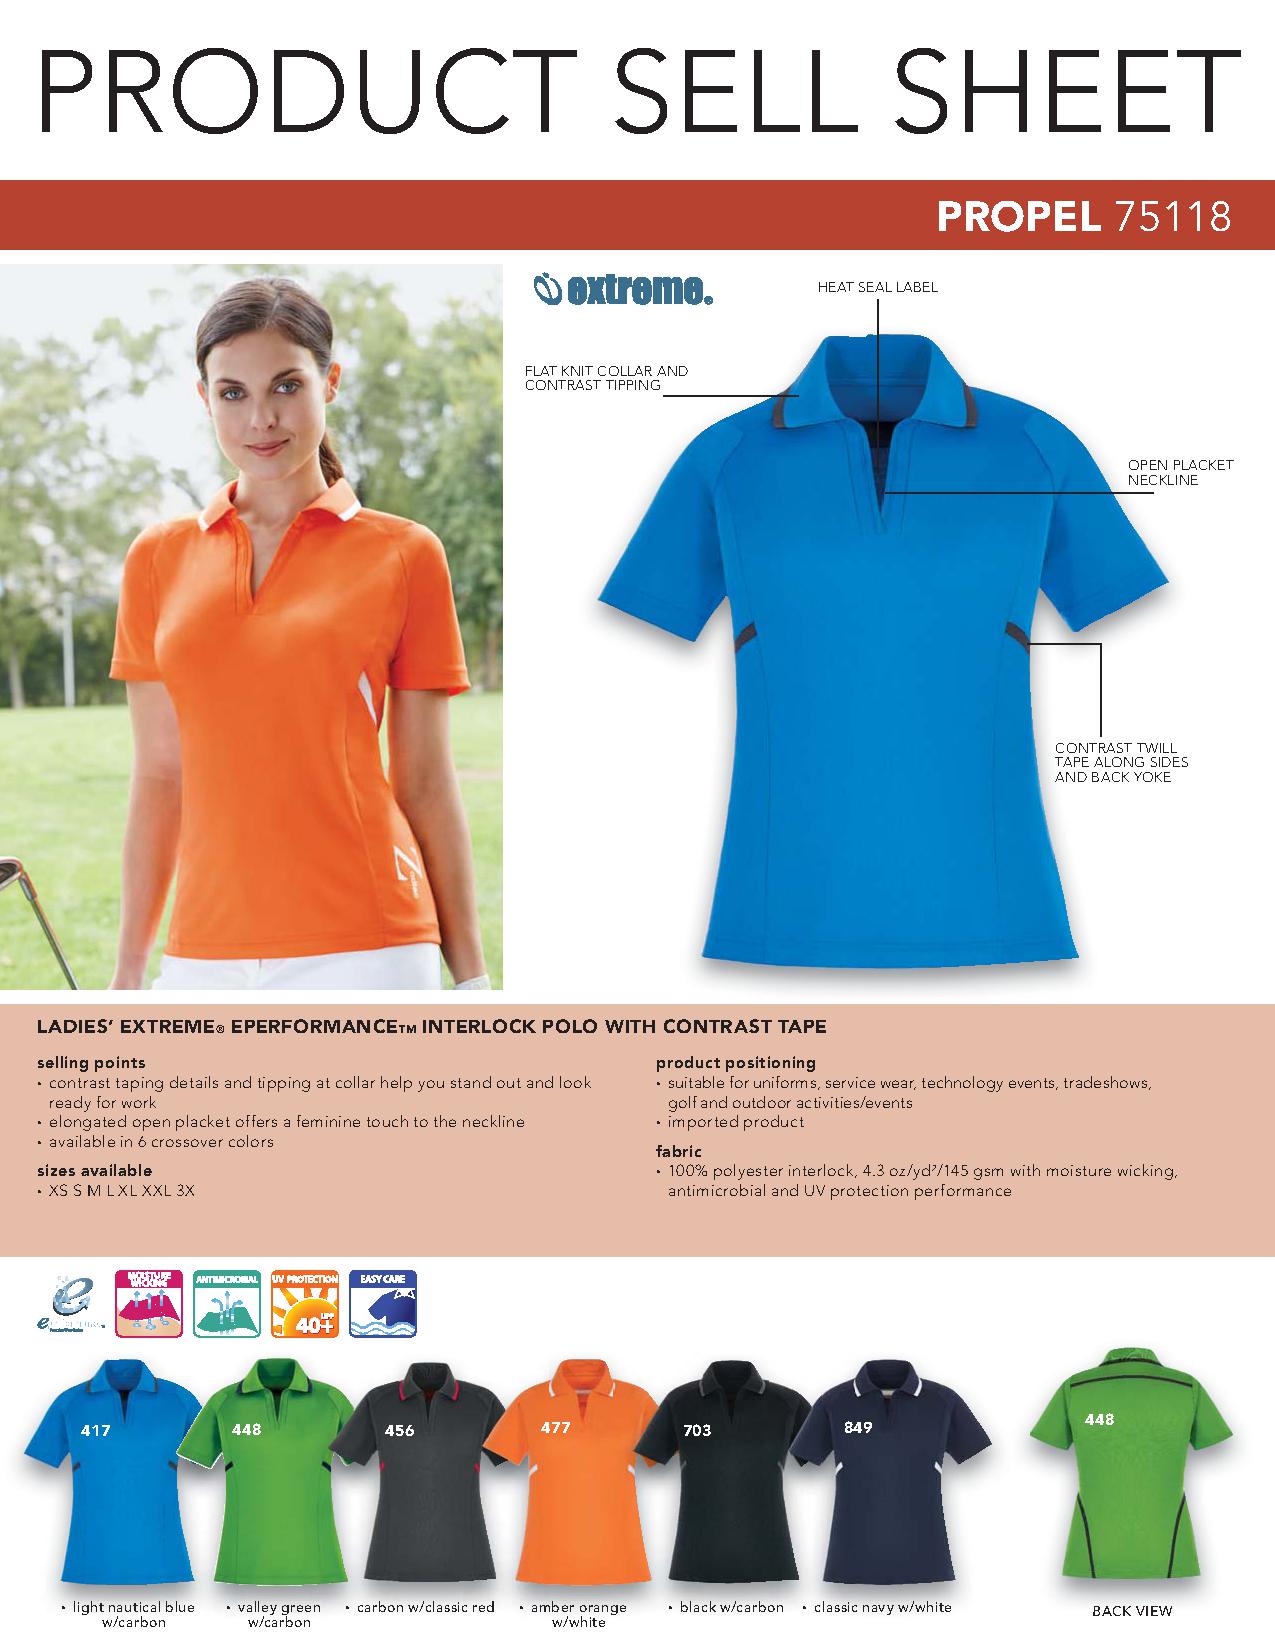 Ash City Eperformance 75118 - Propel Ladies' Eperformance Interlock Polo With Contrast Tape